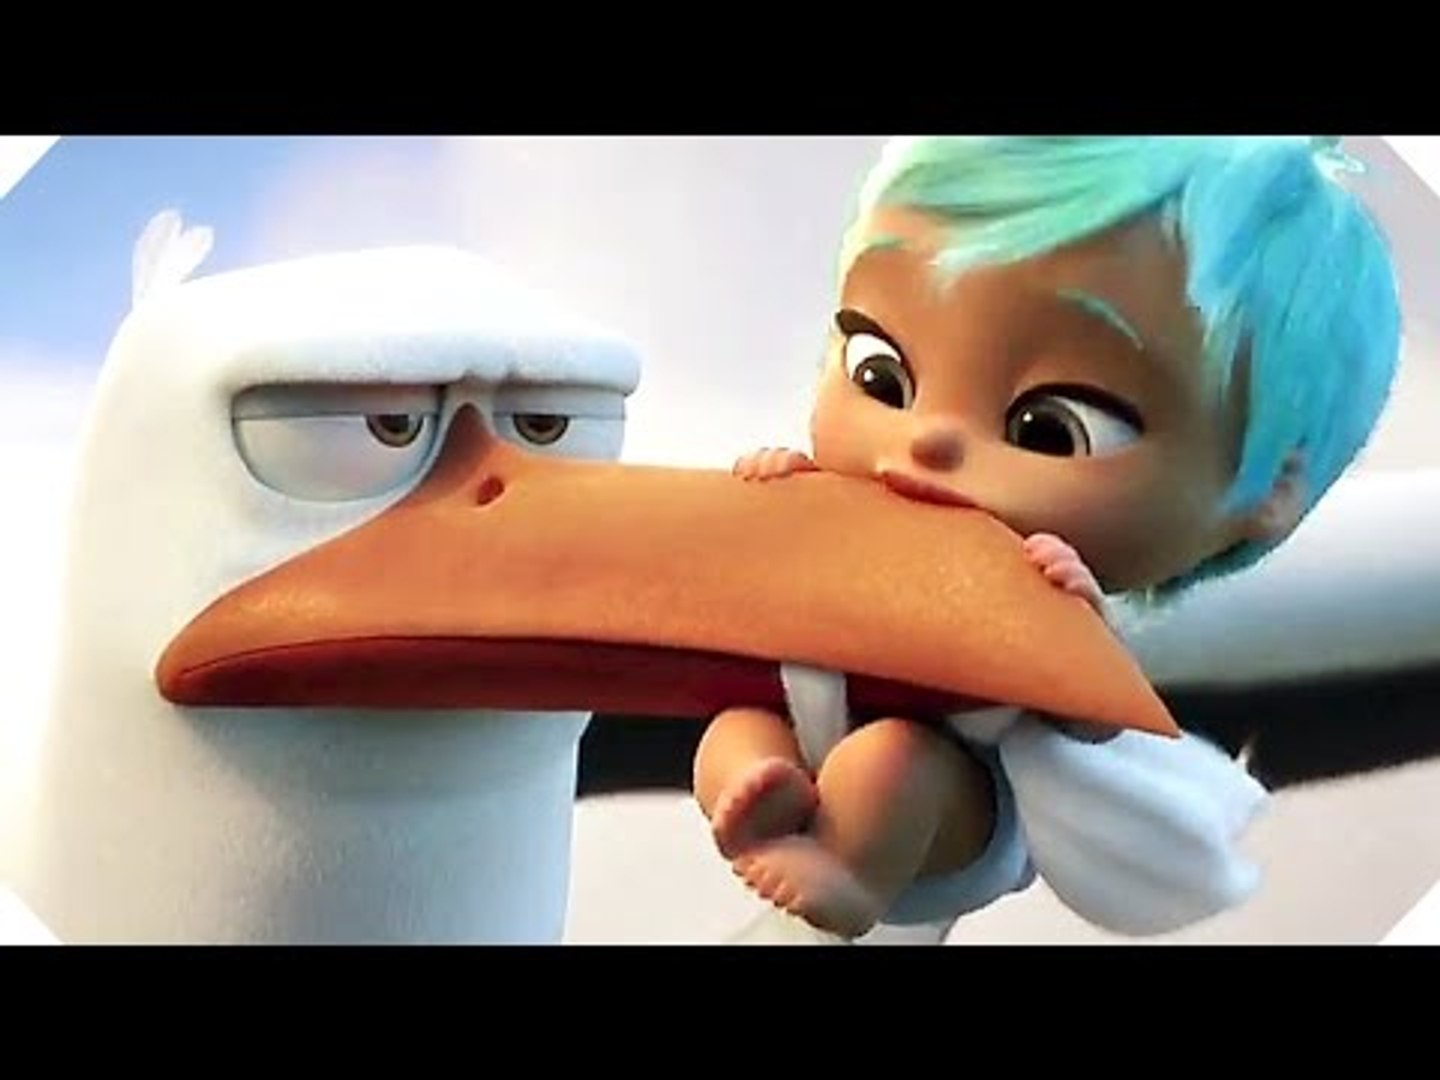 STORKS Trailer # 4 (BABIES Movie - Animation, 2016) - video Dailymotion